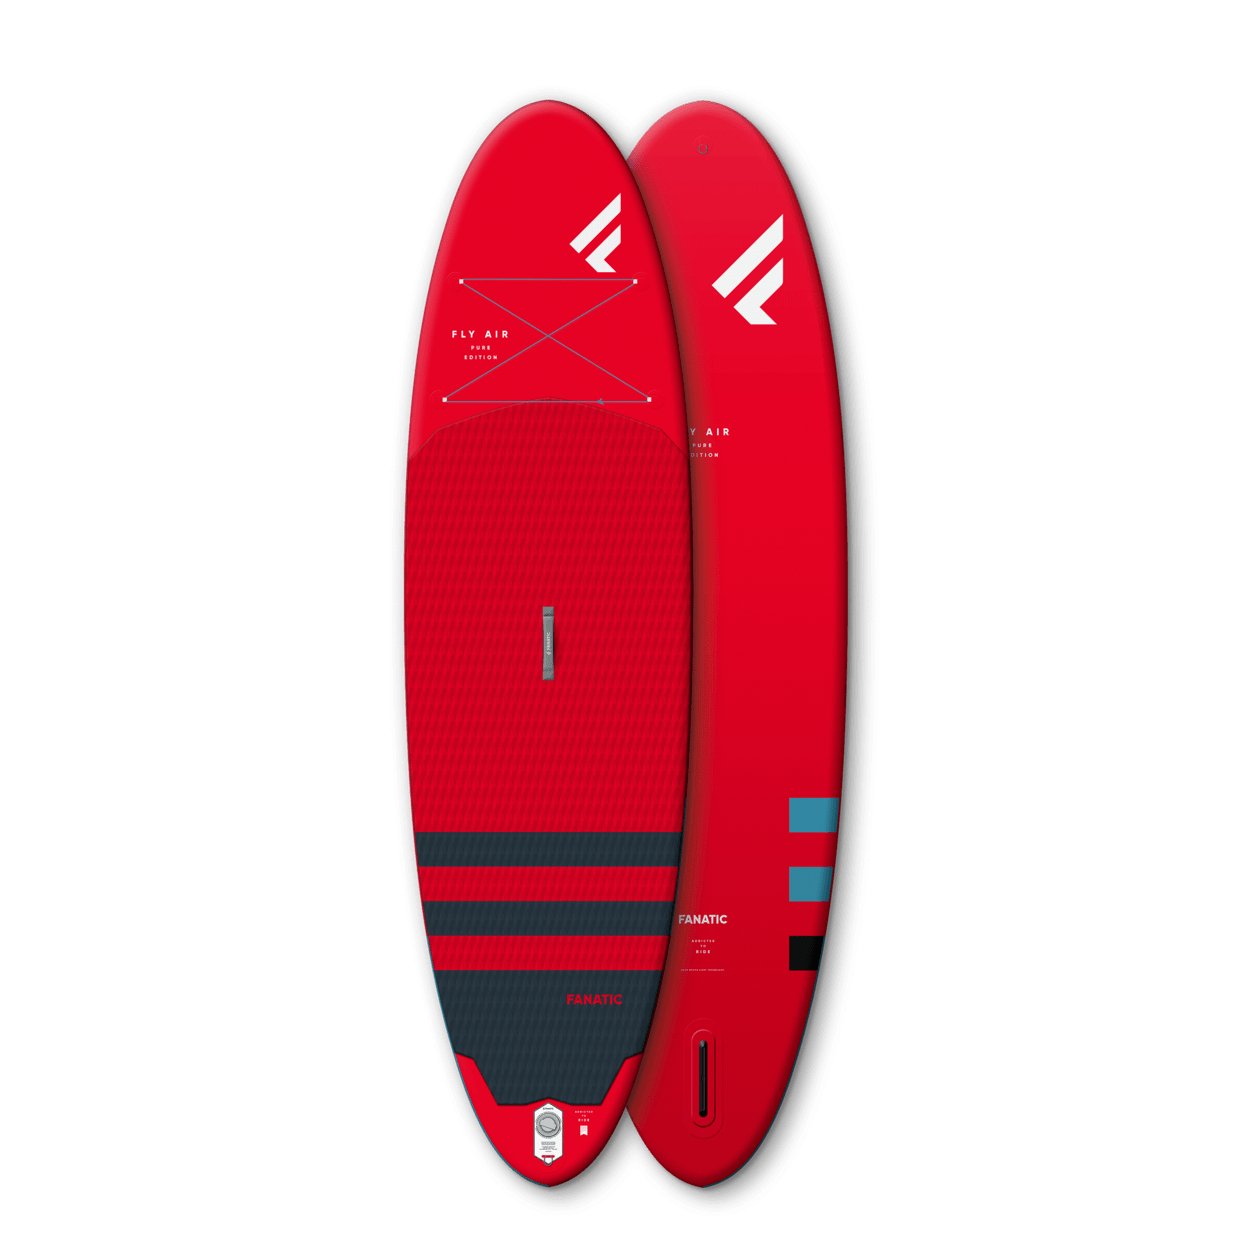 Fanatic Fly Air 2022 (Red) - Worthing Watersports - 9010583015781 - SUP Inflatables - Fanatic SUP